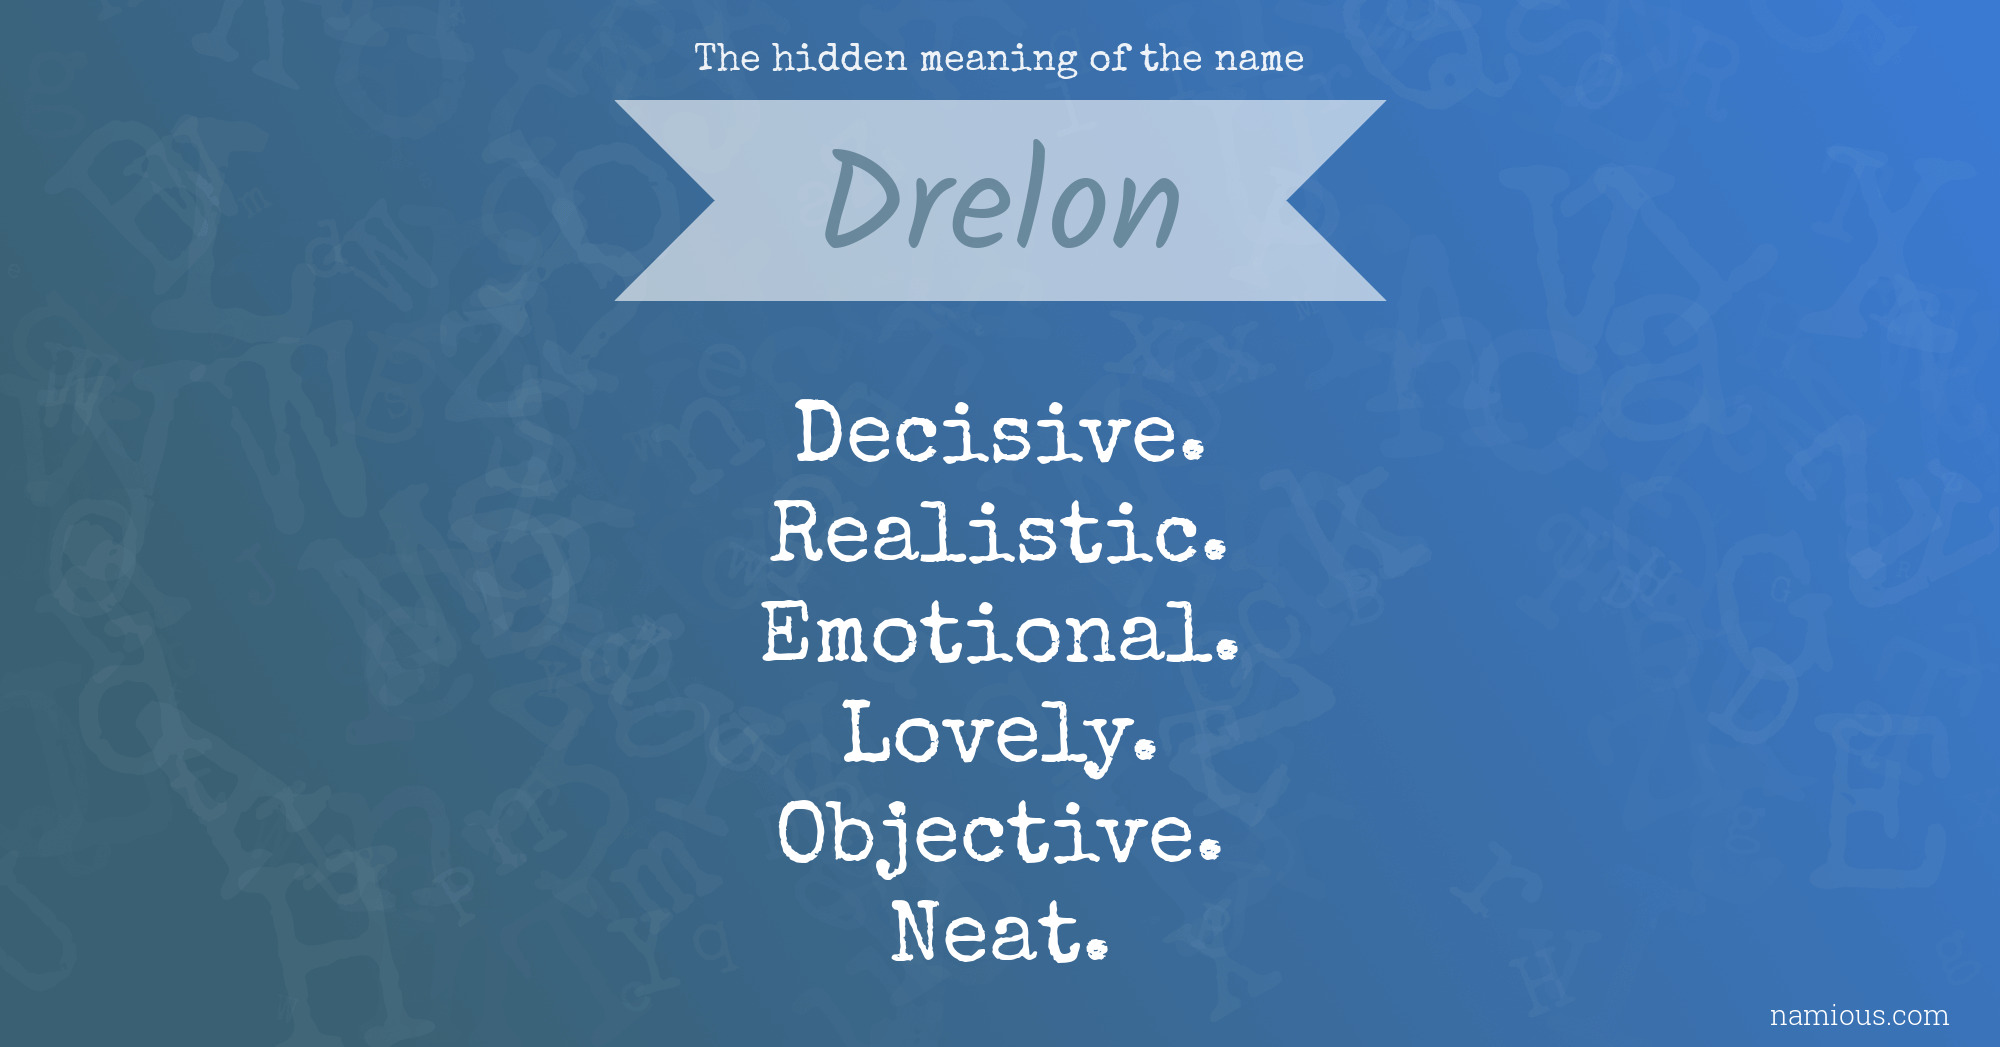 The hidden meaning of the name Drelon